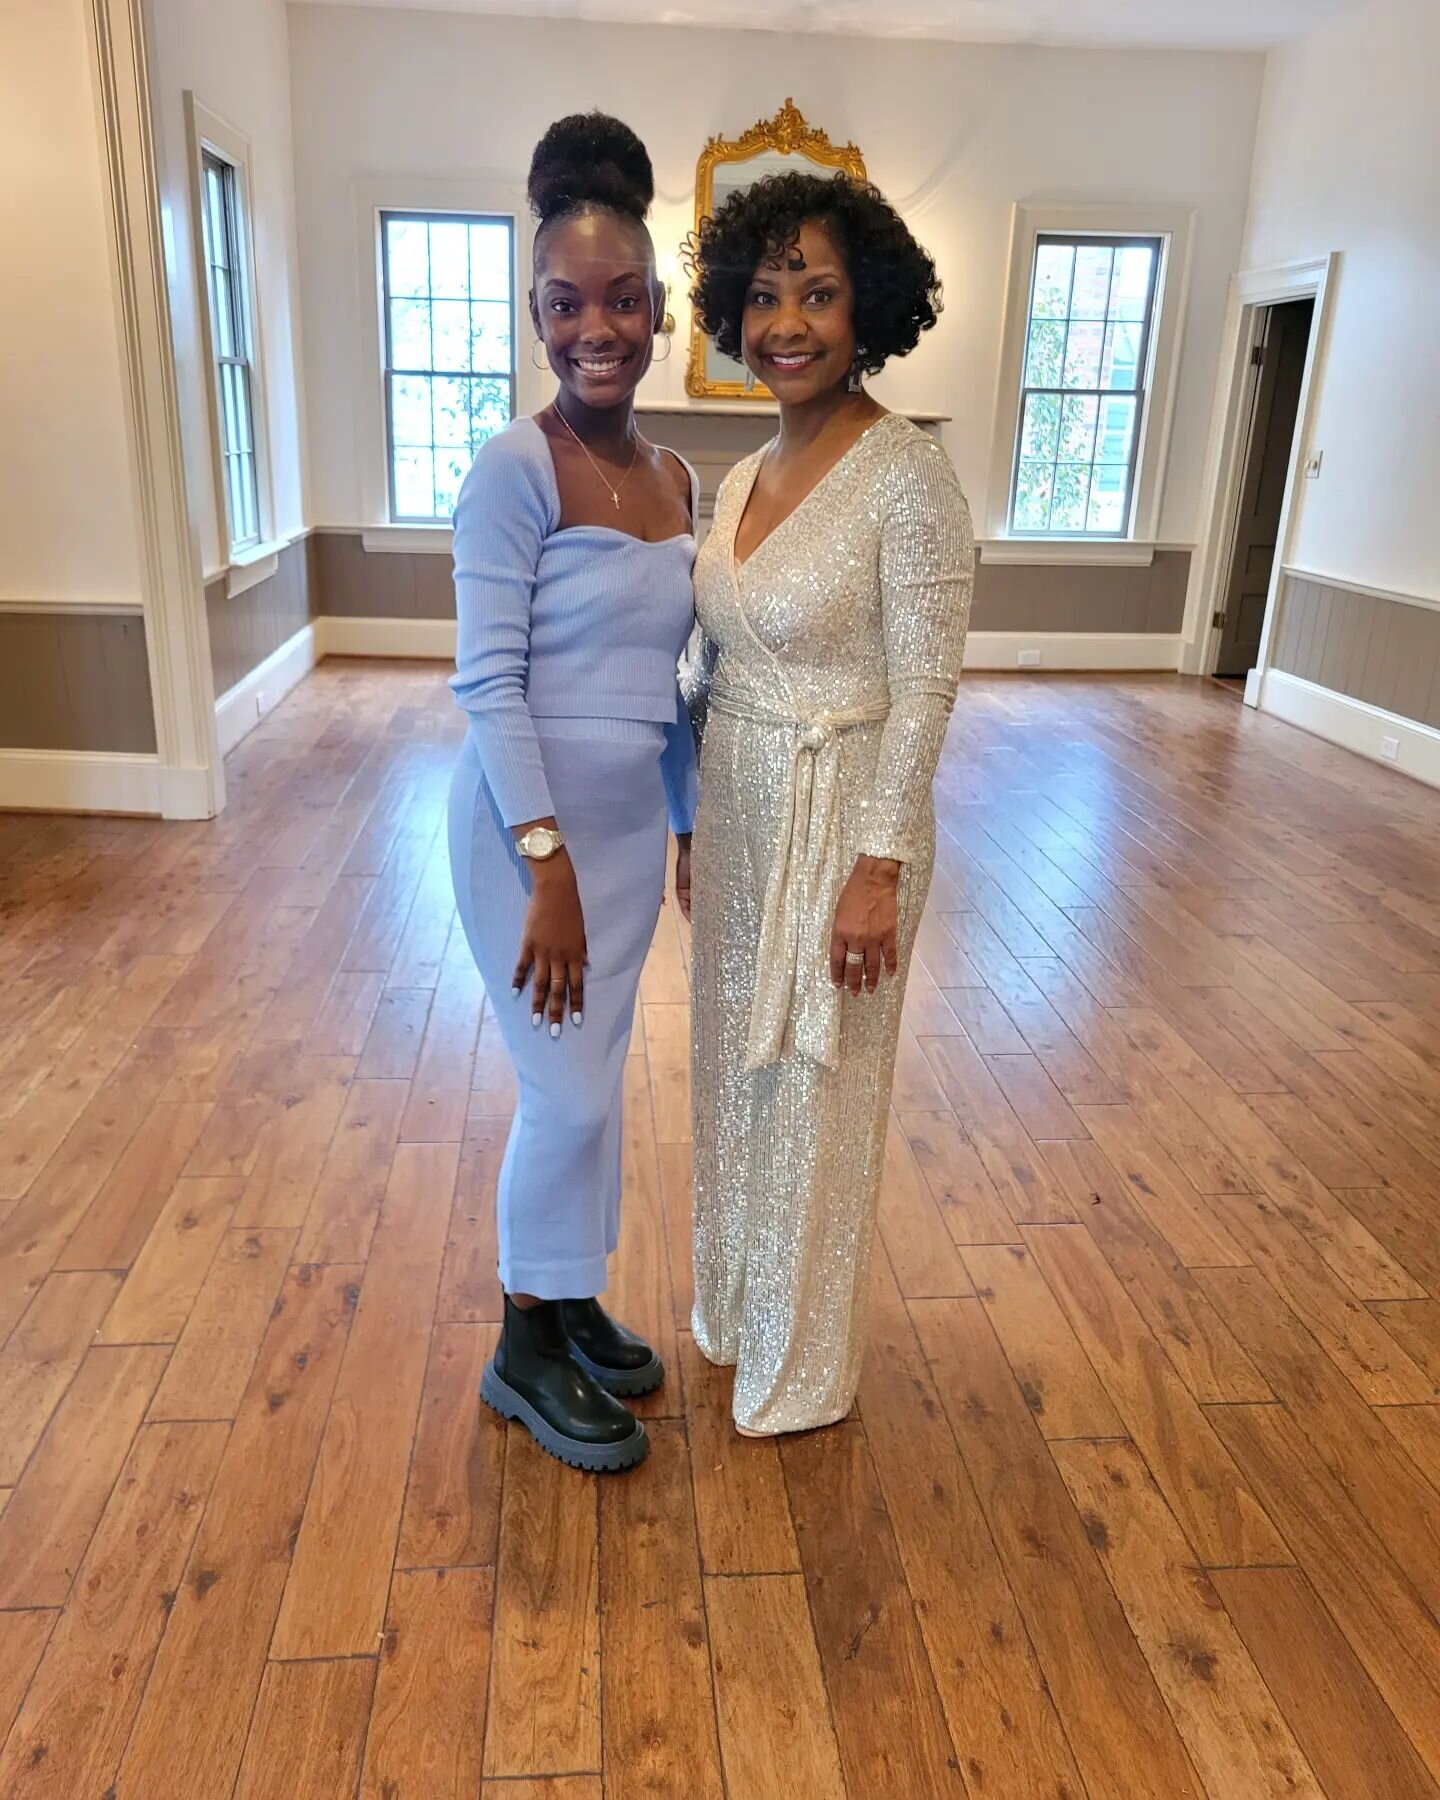 It was a Mother /Daughter duo weekend here at 716 West.
Last year, we hosted the College graduation party of Miss Mya &amp; today we got to celebrate with her Mom &amp; Friends! 
  Can't wait to host the Avery family again soon!